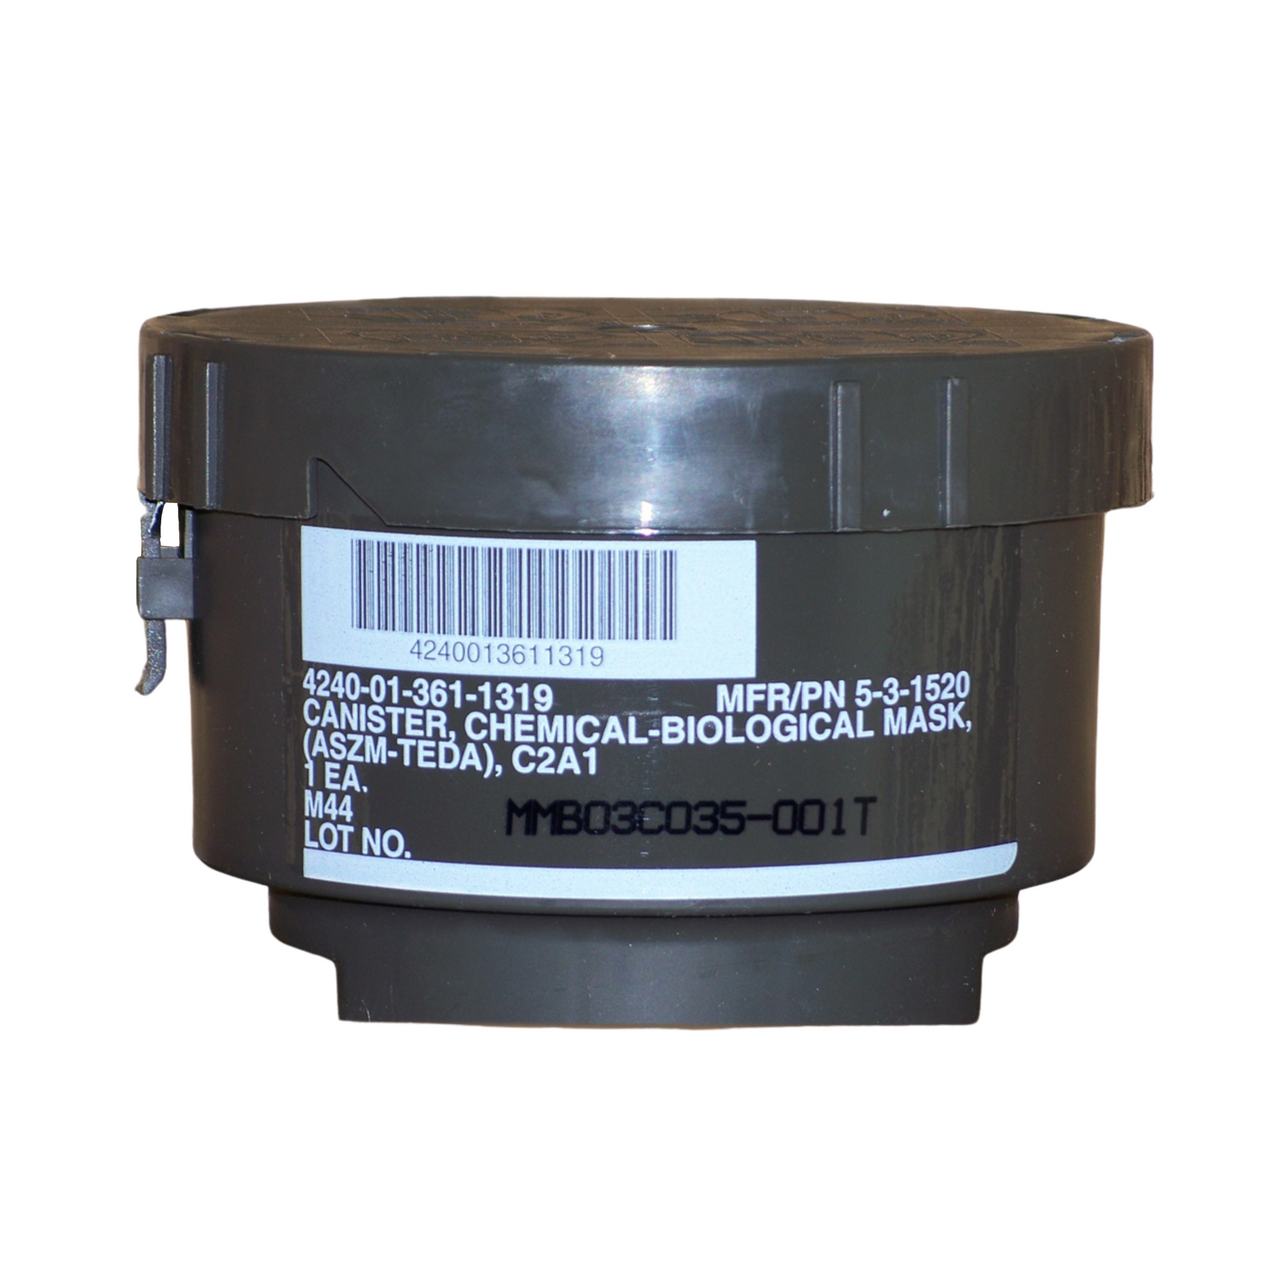 T030 C2A1 MASK CANISTER